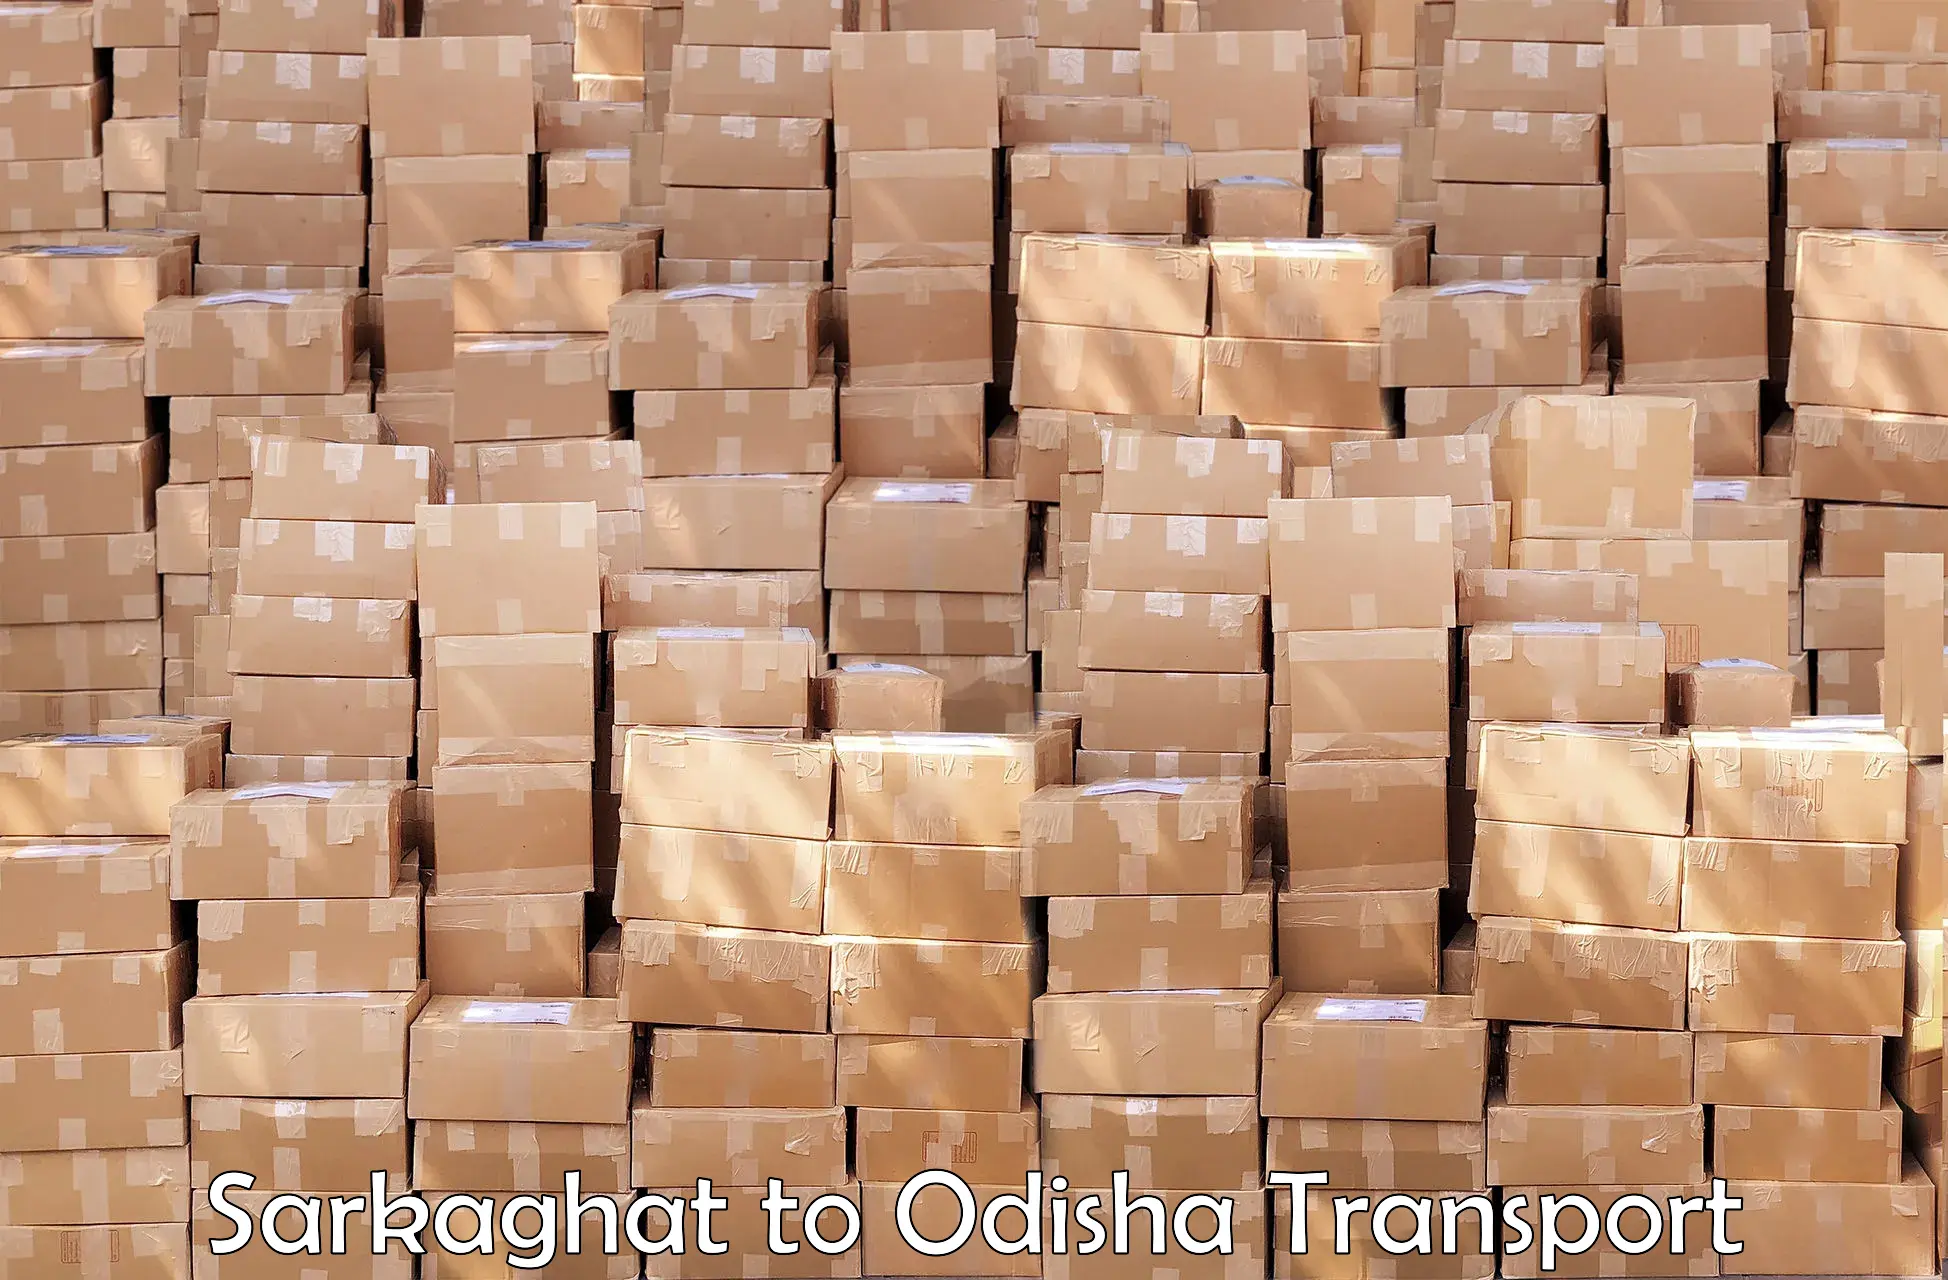 Goods delivery service Sarkaghat to Odisha